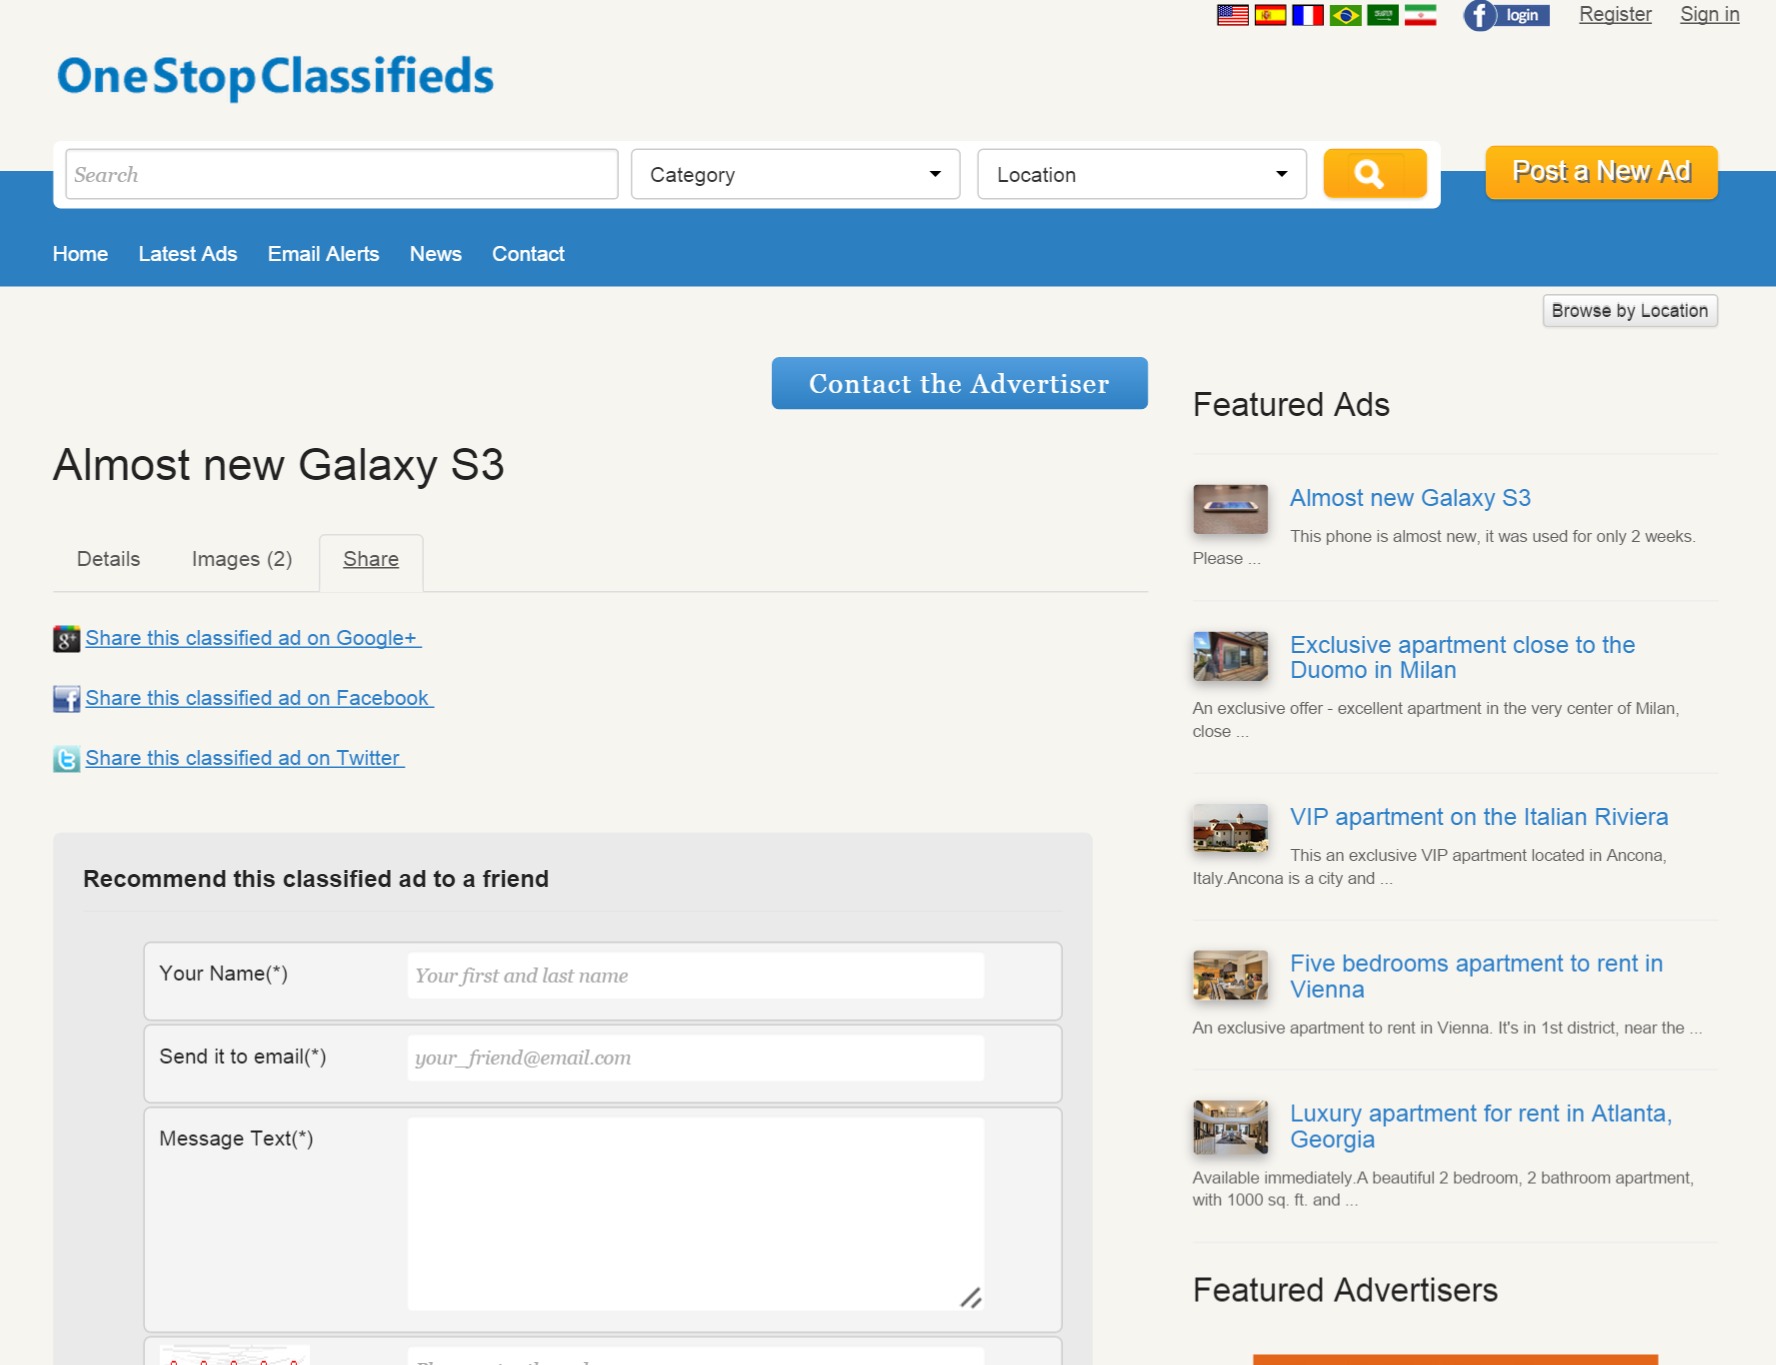 sharing ads on social networks php classifieds script